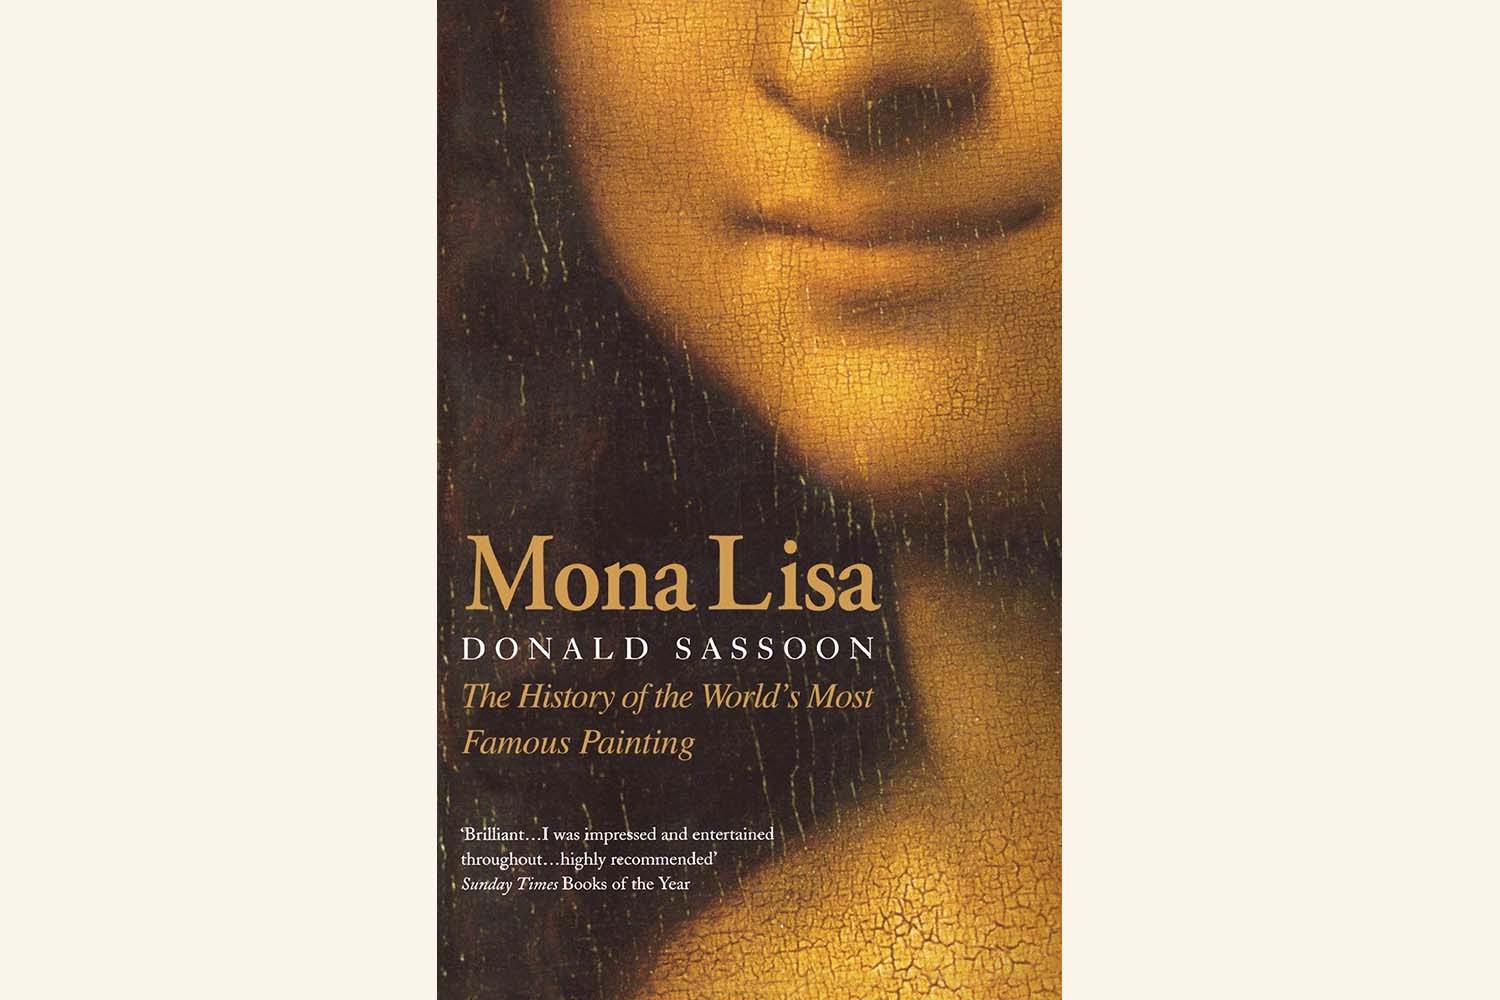 Mona Lisa: The History of the World’s Most Famous Painting, by Donald Sassoon